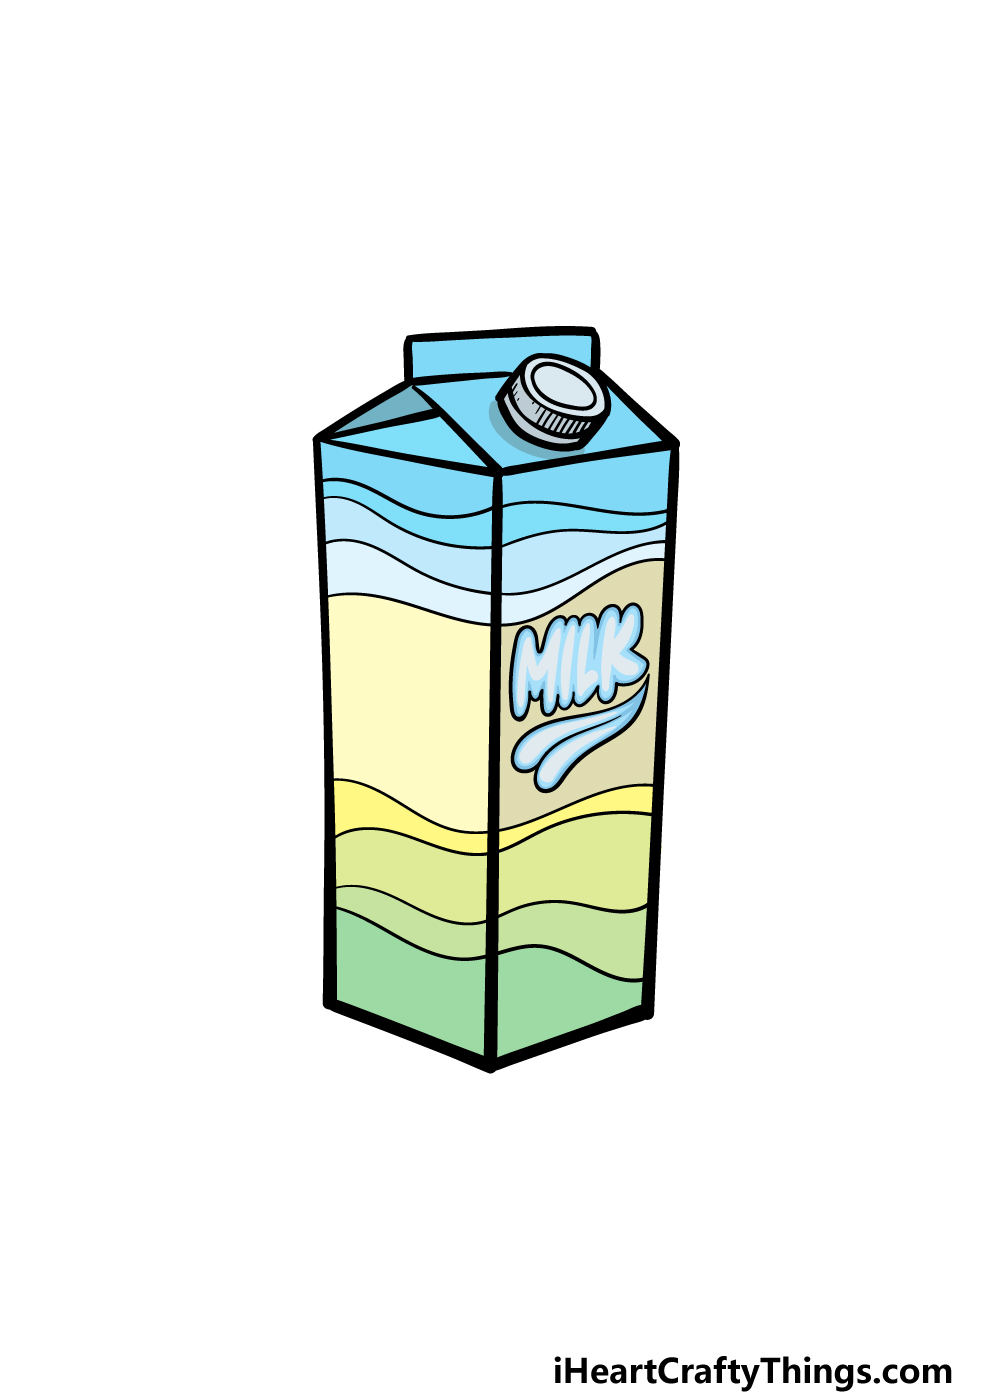 How To Draw A Milk Carton – A Step by Step Guide